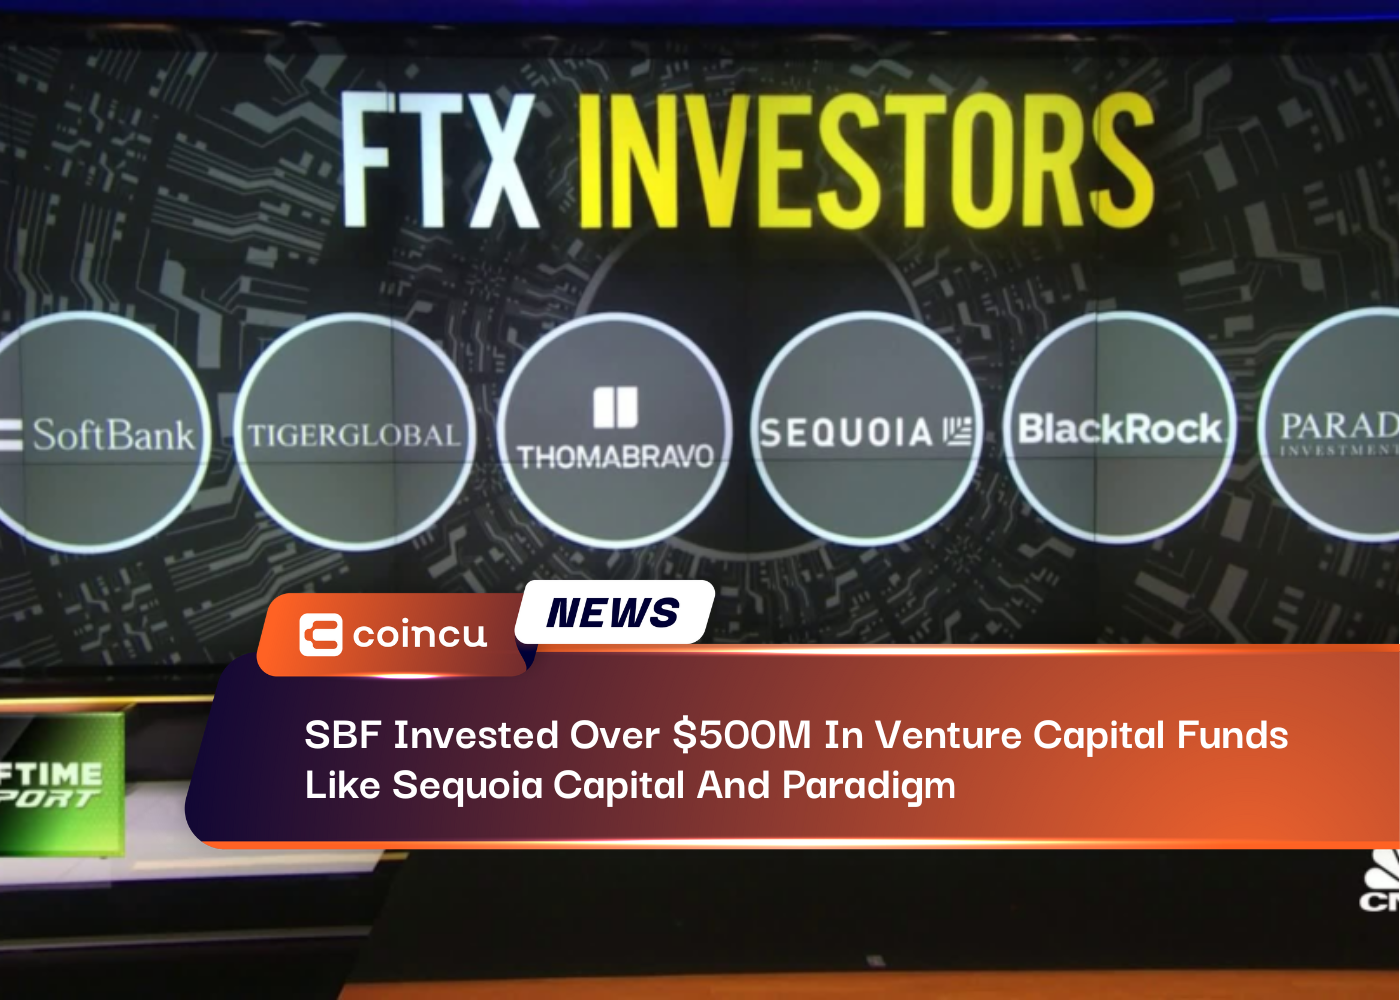 SBF Invested Over $500M In Venture Capital Funds Like Sequoia Capital And Paradigm